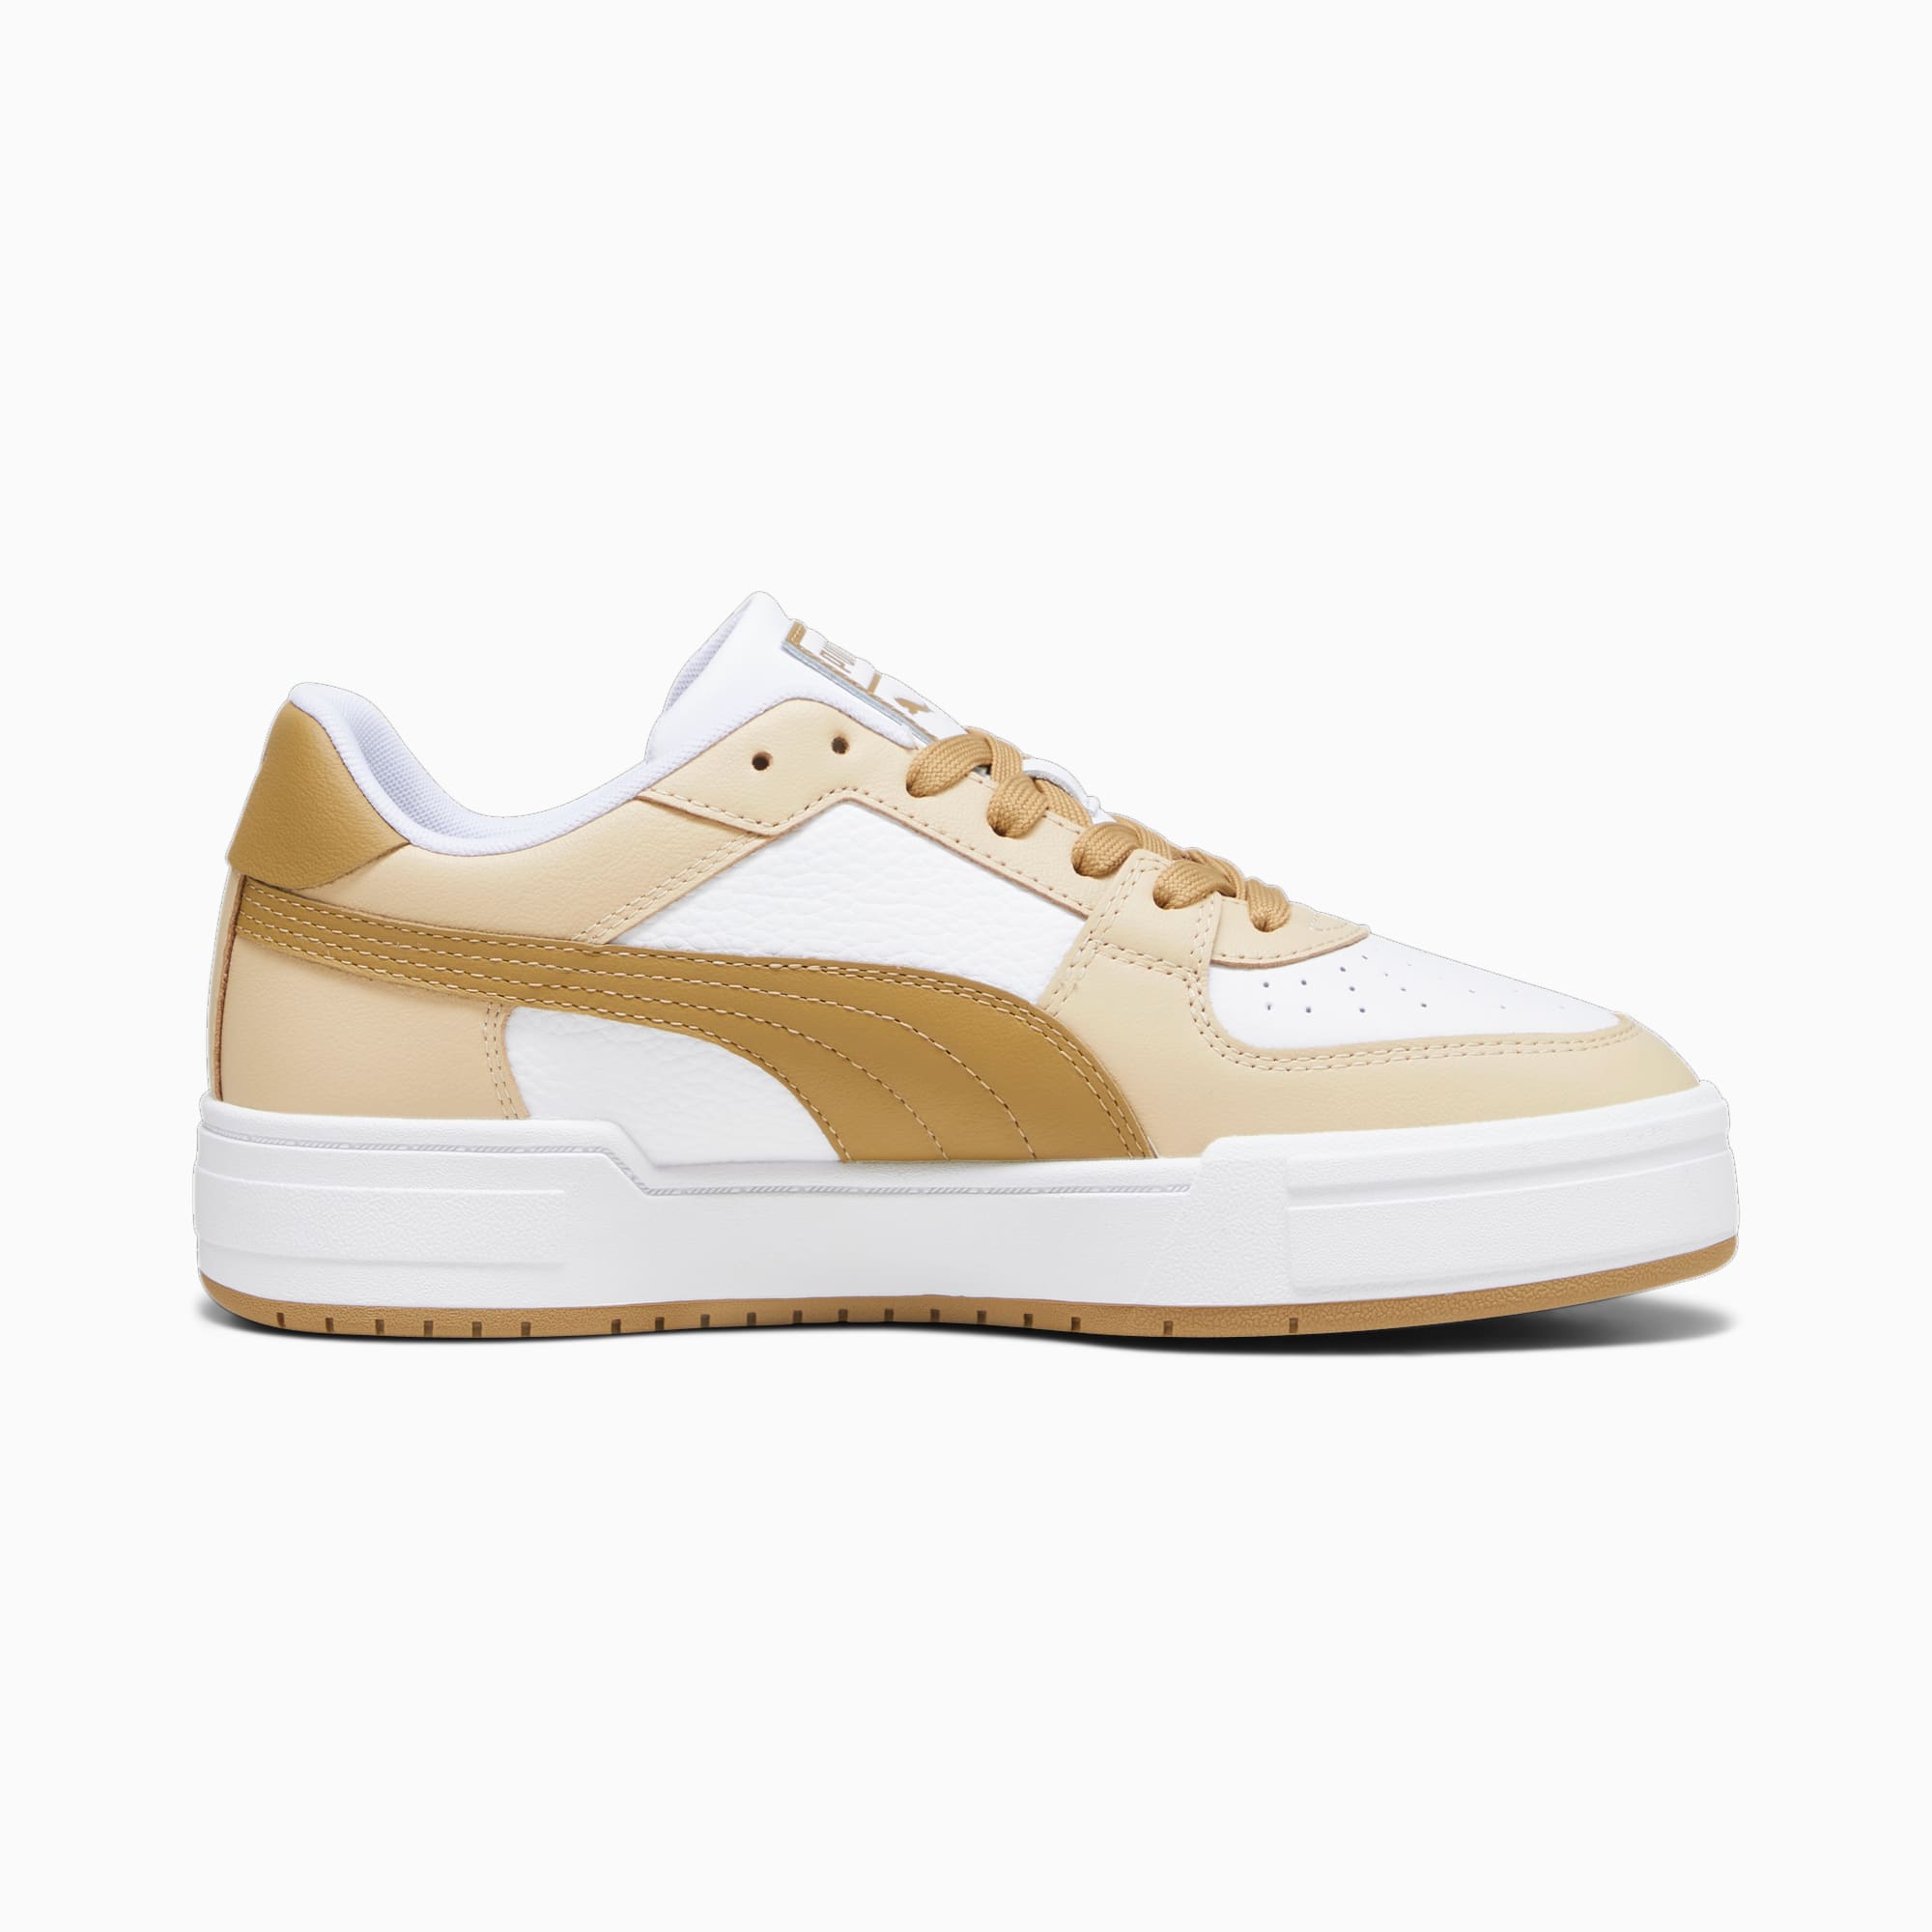 Women's PUMA Ca Pro Classic Trainers, White/Granola/Toasted, Size 41, Shoes